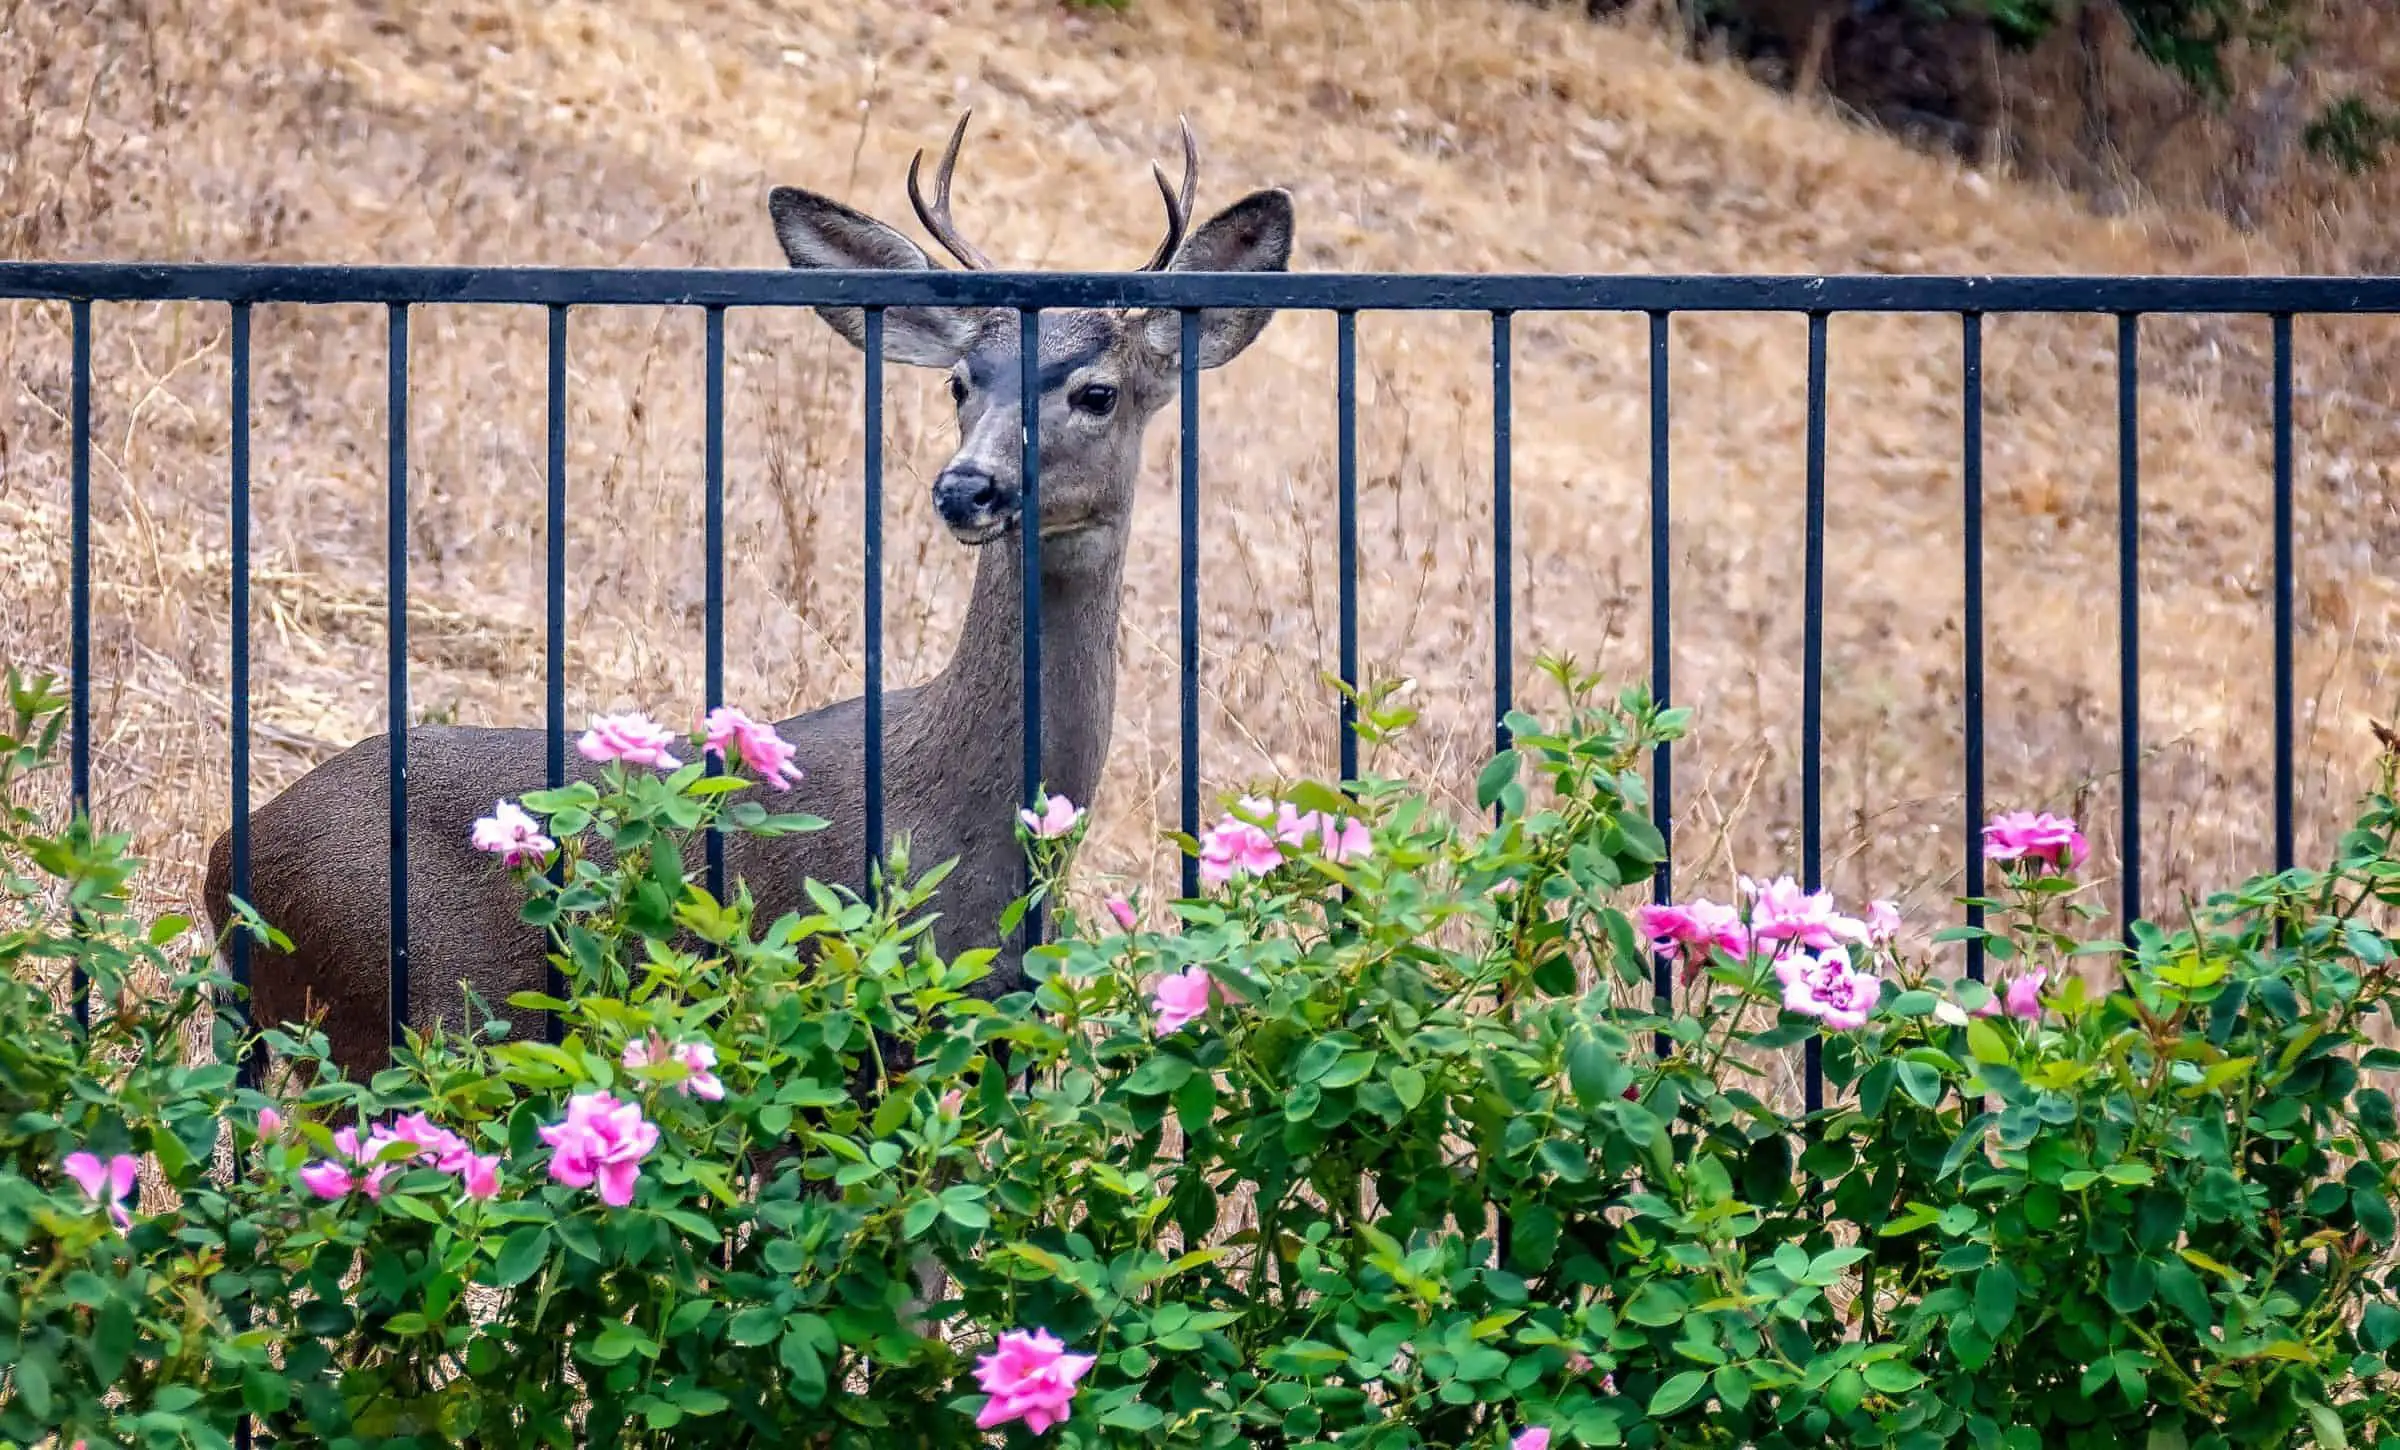 A deer kept out of the garden by a metal fence.